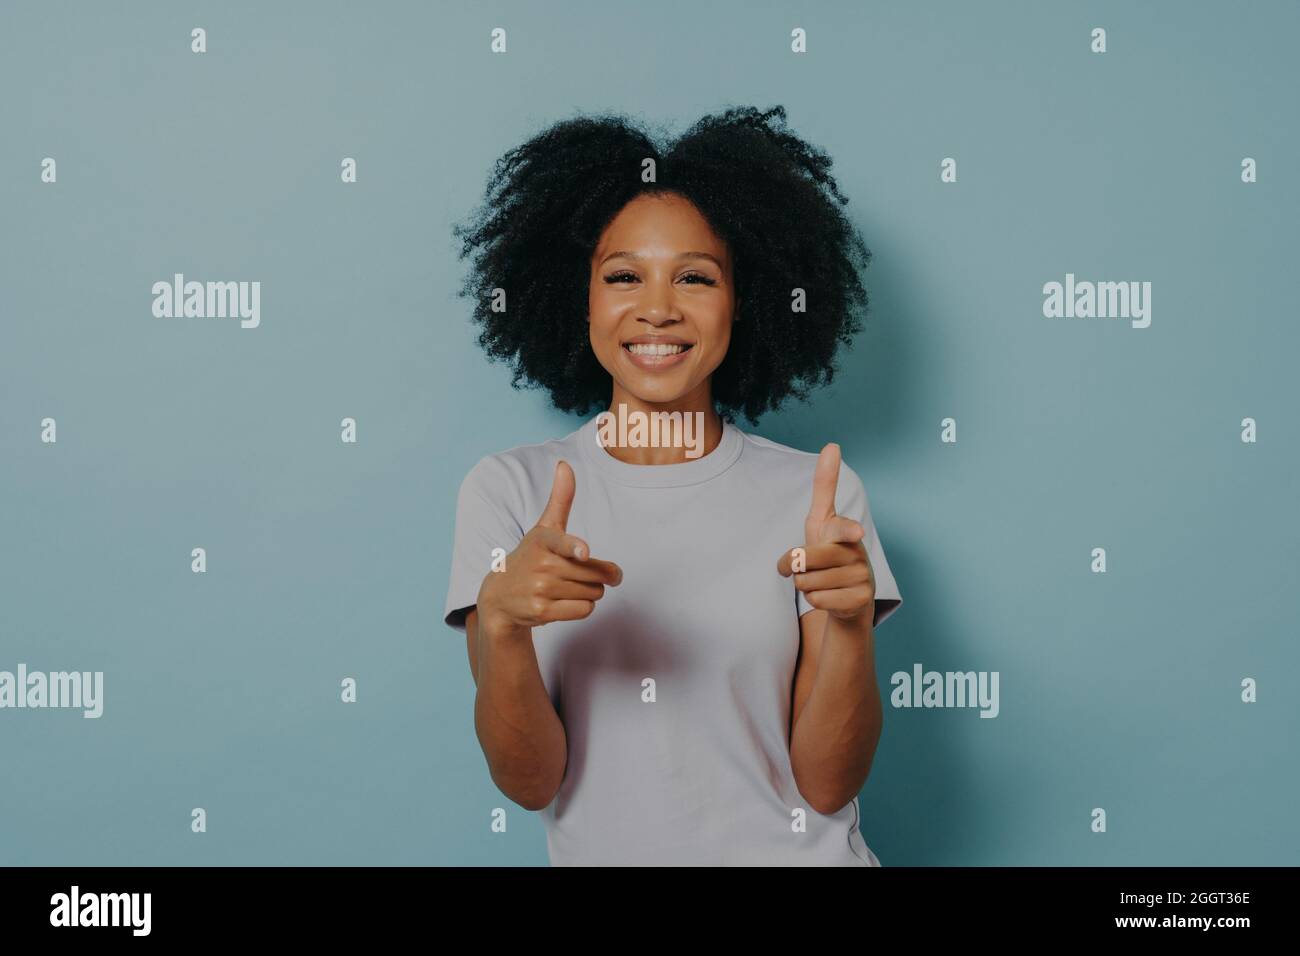 Positive friendly dark skinned lady making finger gun gesture while standing on blue background Stock Photo